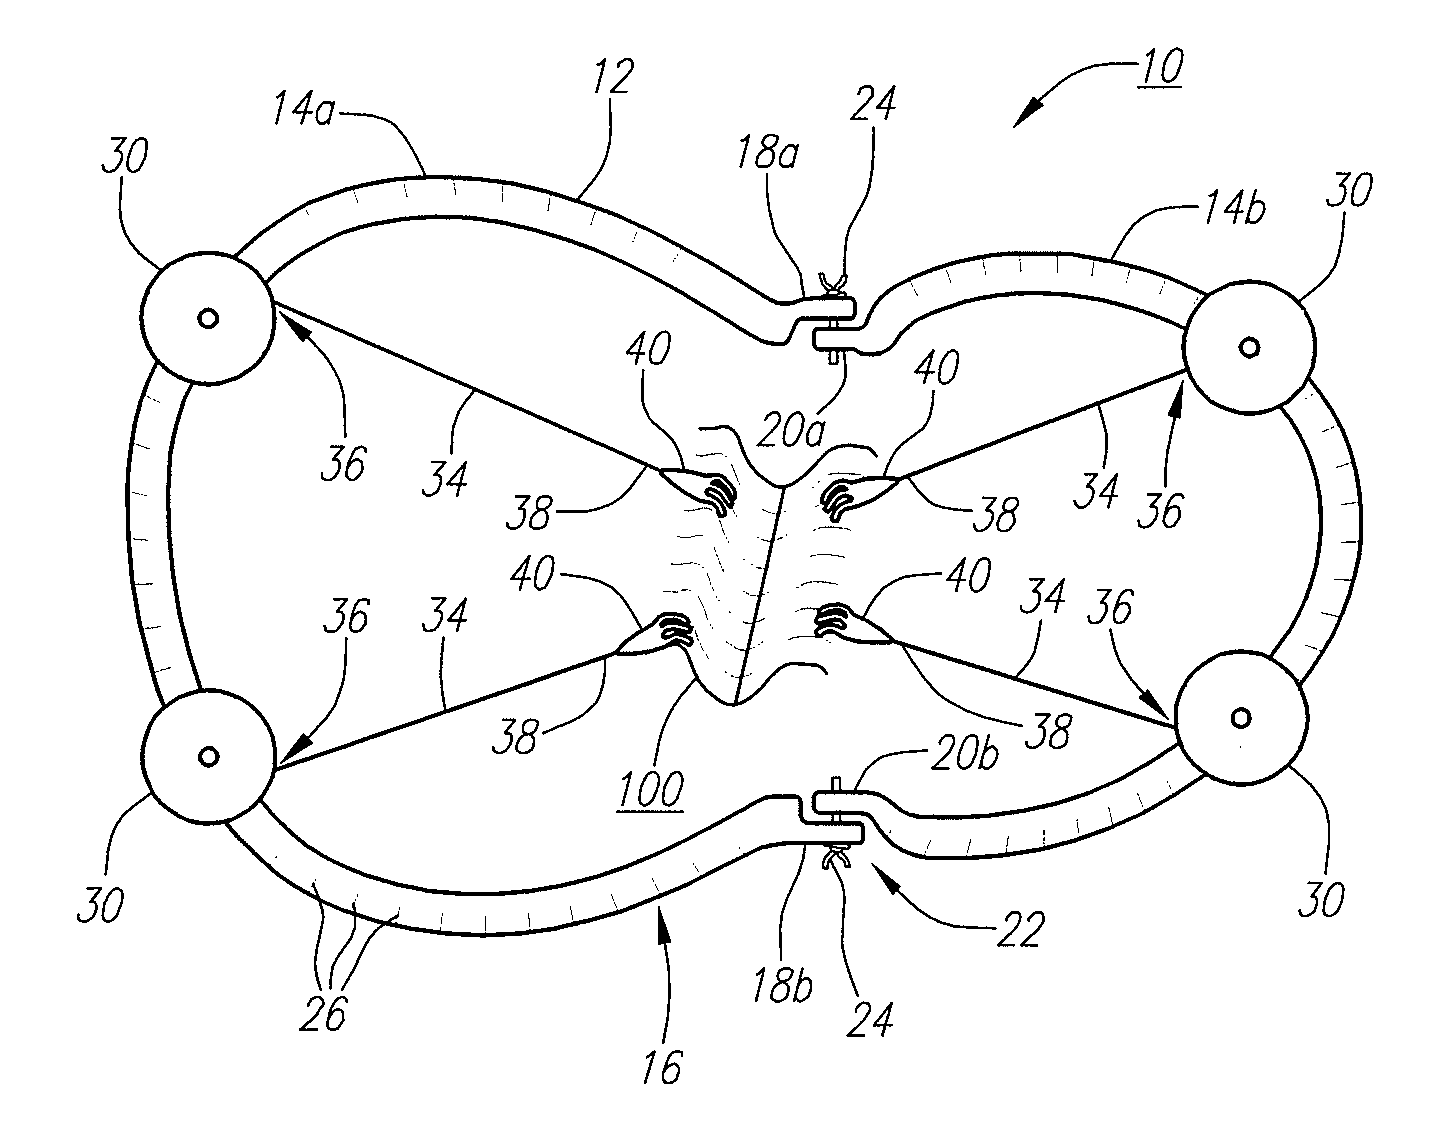 Surgical retractor device and method of use